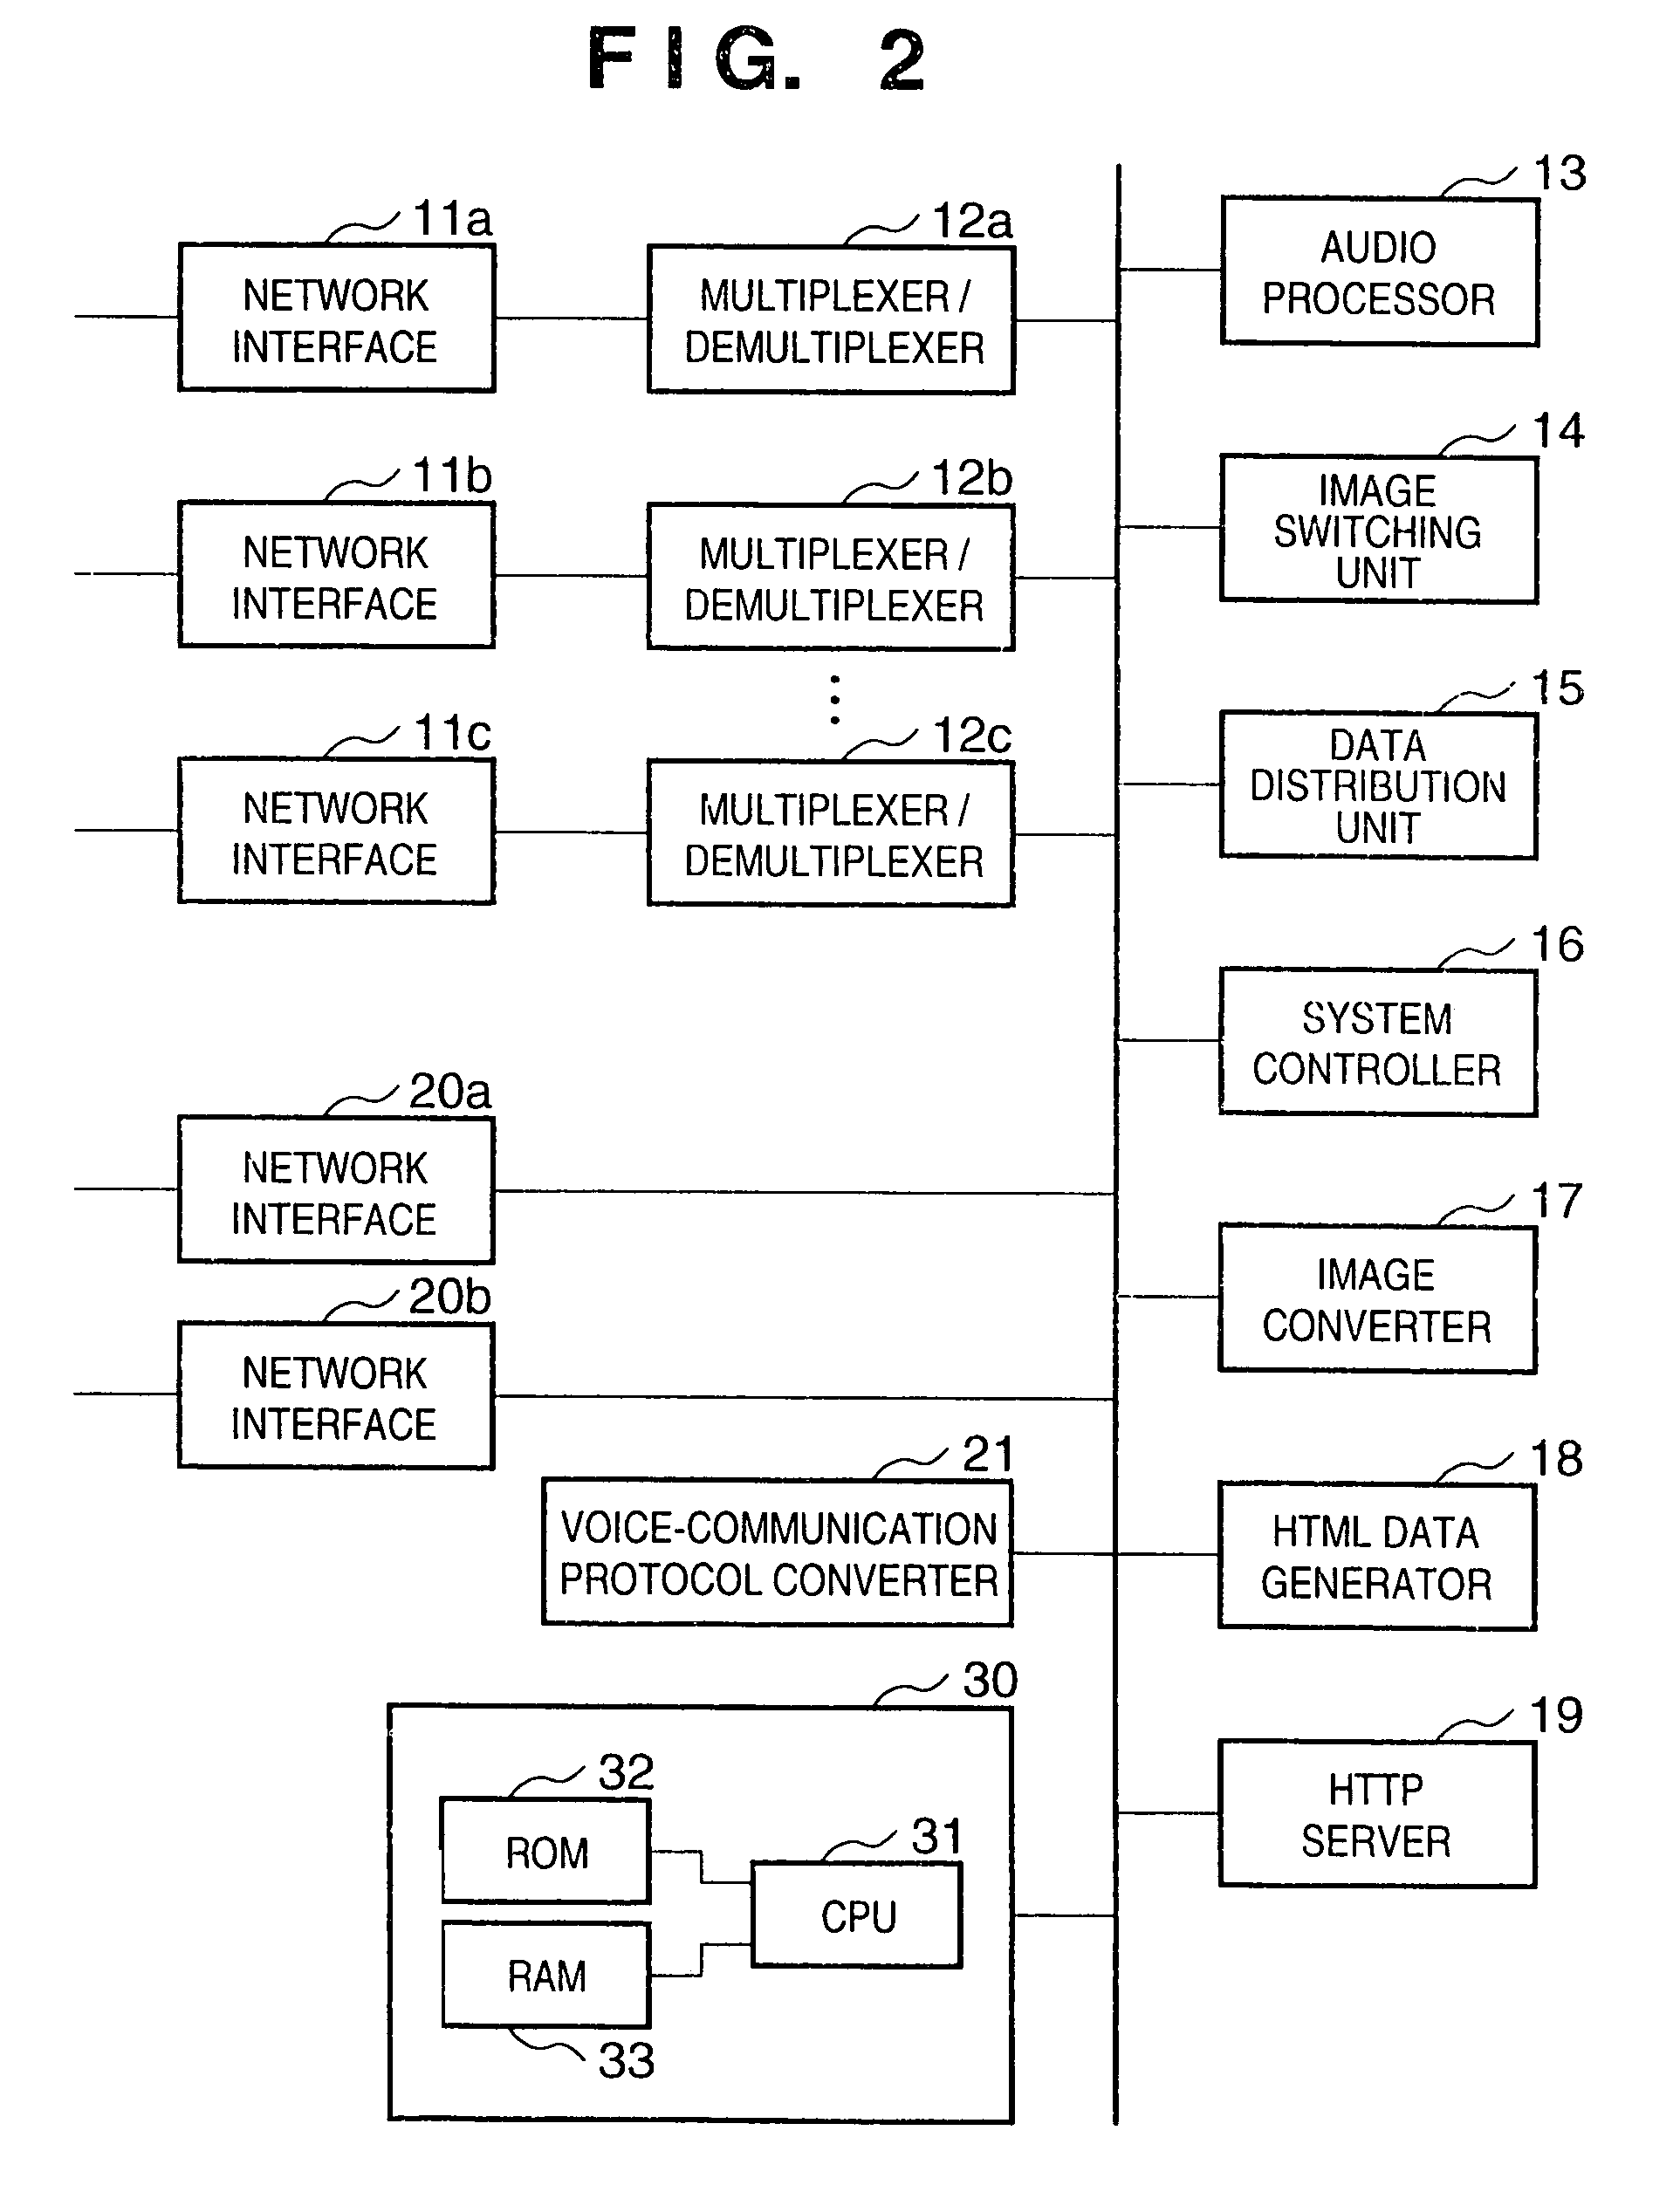 Data communication control apparatus and method adapted to control distribution of data corresponding to various types of a plurality of terminals